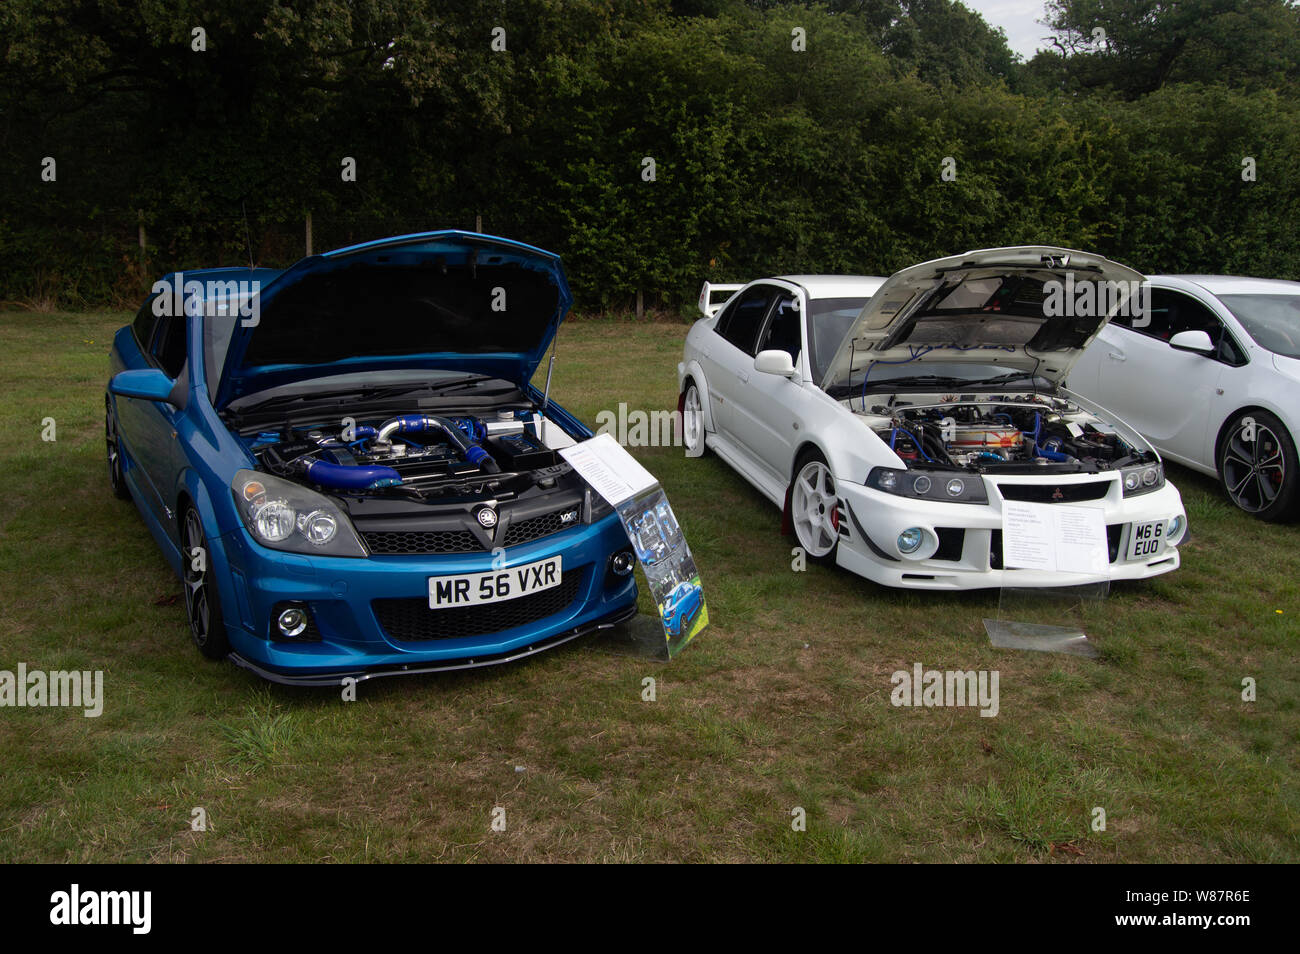 Vauxhall Astra VXR and Mitsuibishi Evo 6 side by side at the Festival of Wheels show at Trinity Park, Ipswich Suffolk UK. Stock Photo